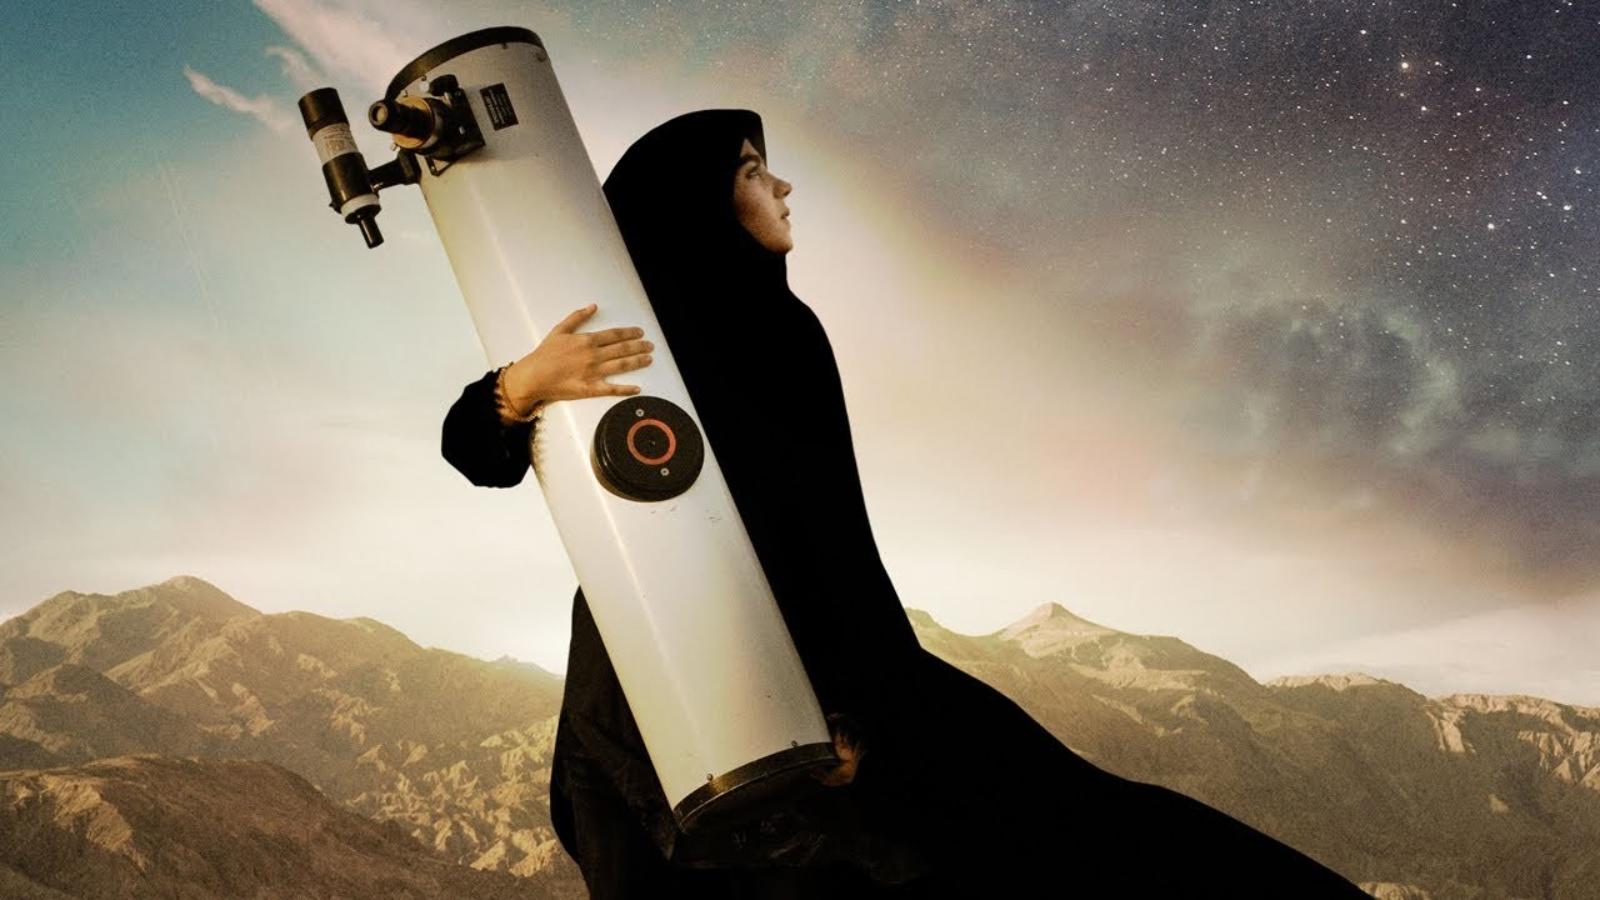 Sepideh: Reaching for the Stars